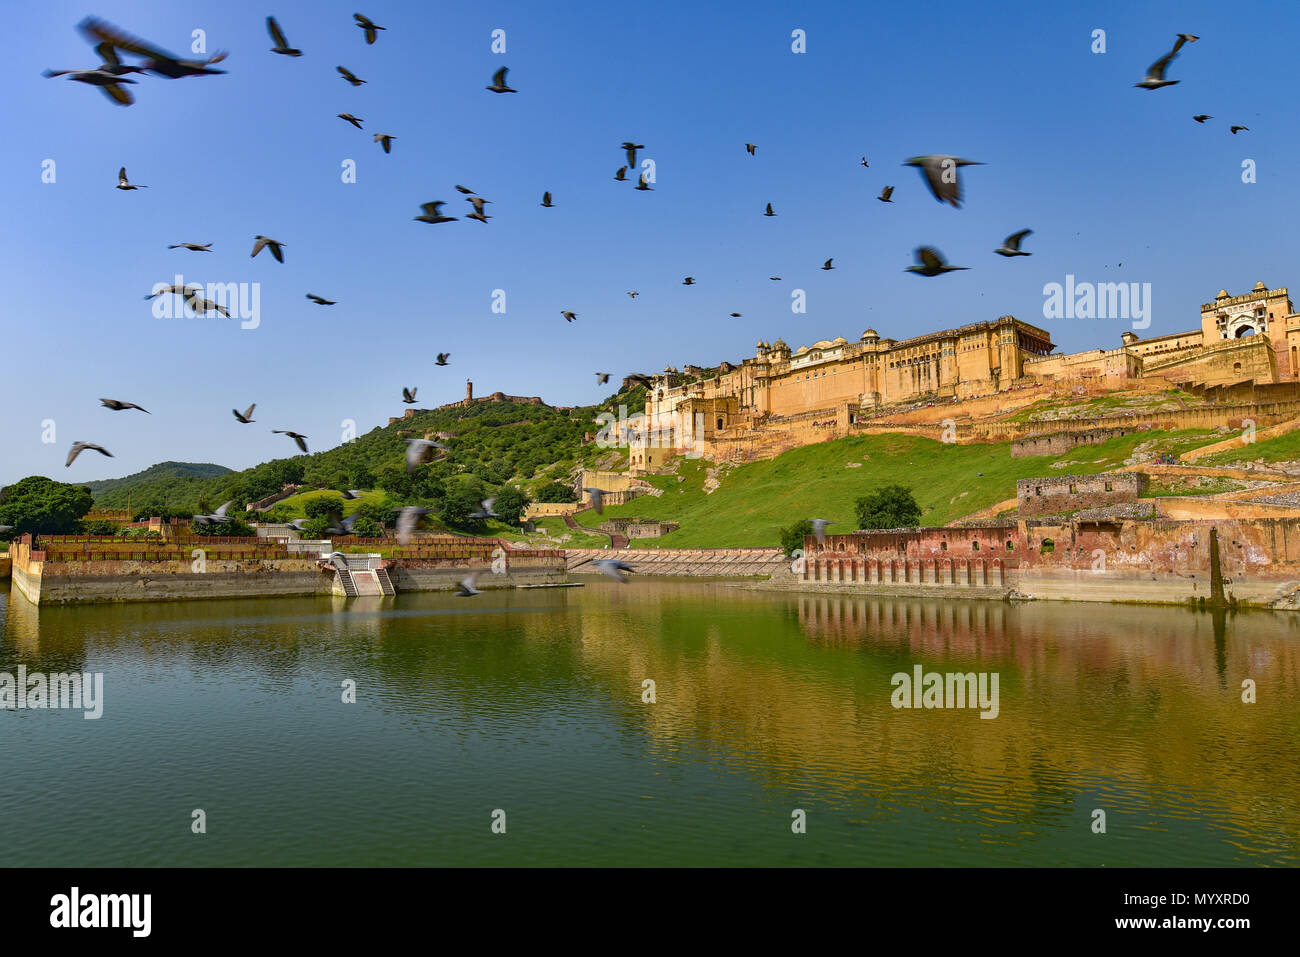 Amer Fort with reflection on water and birds, Jaipur, India Stock Photo